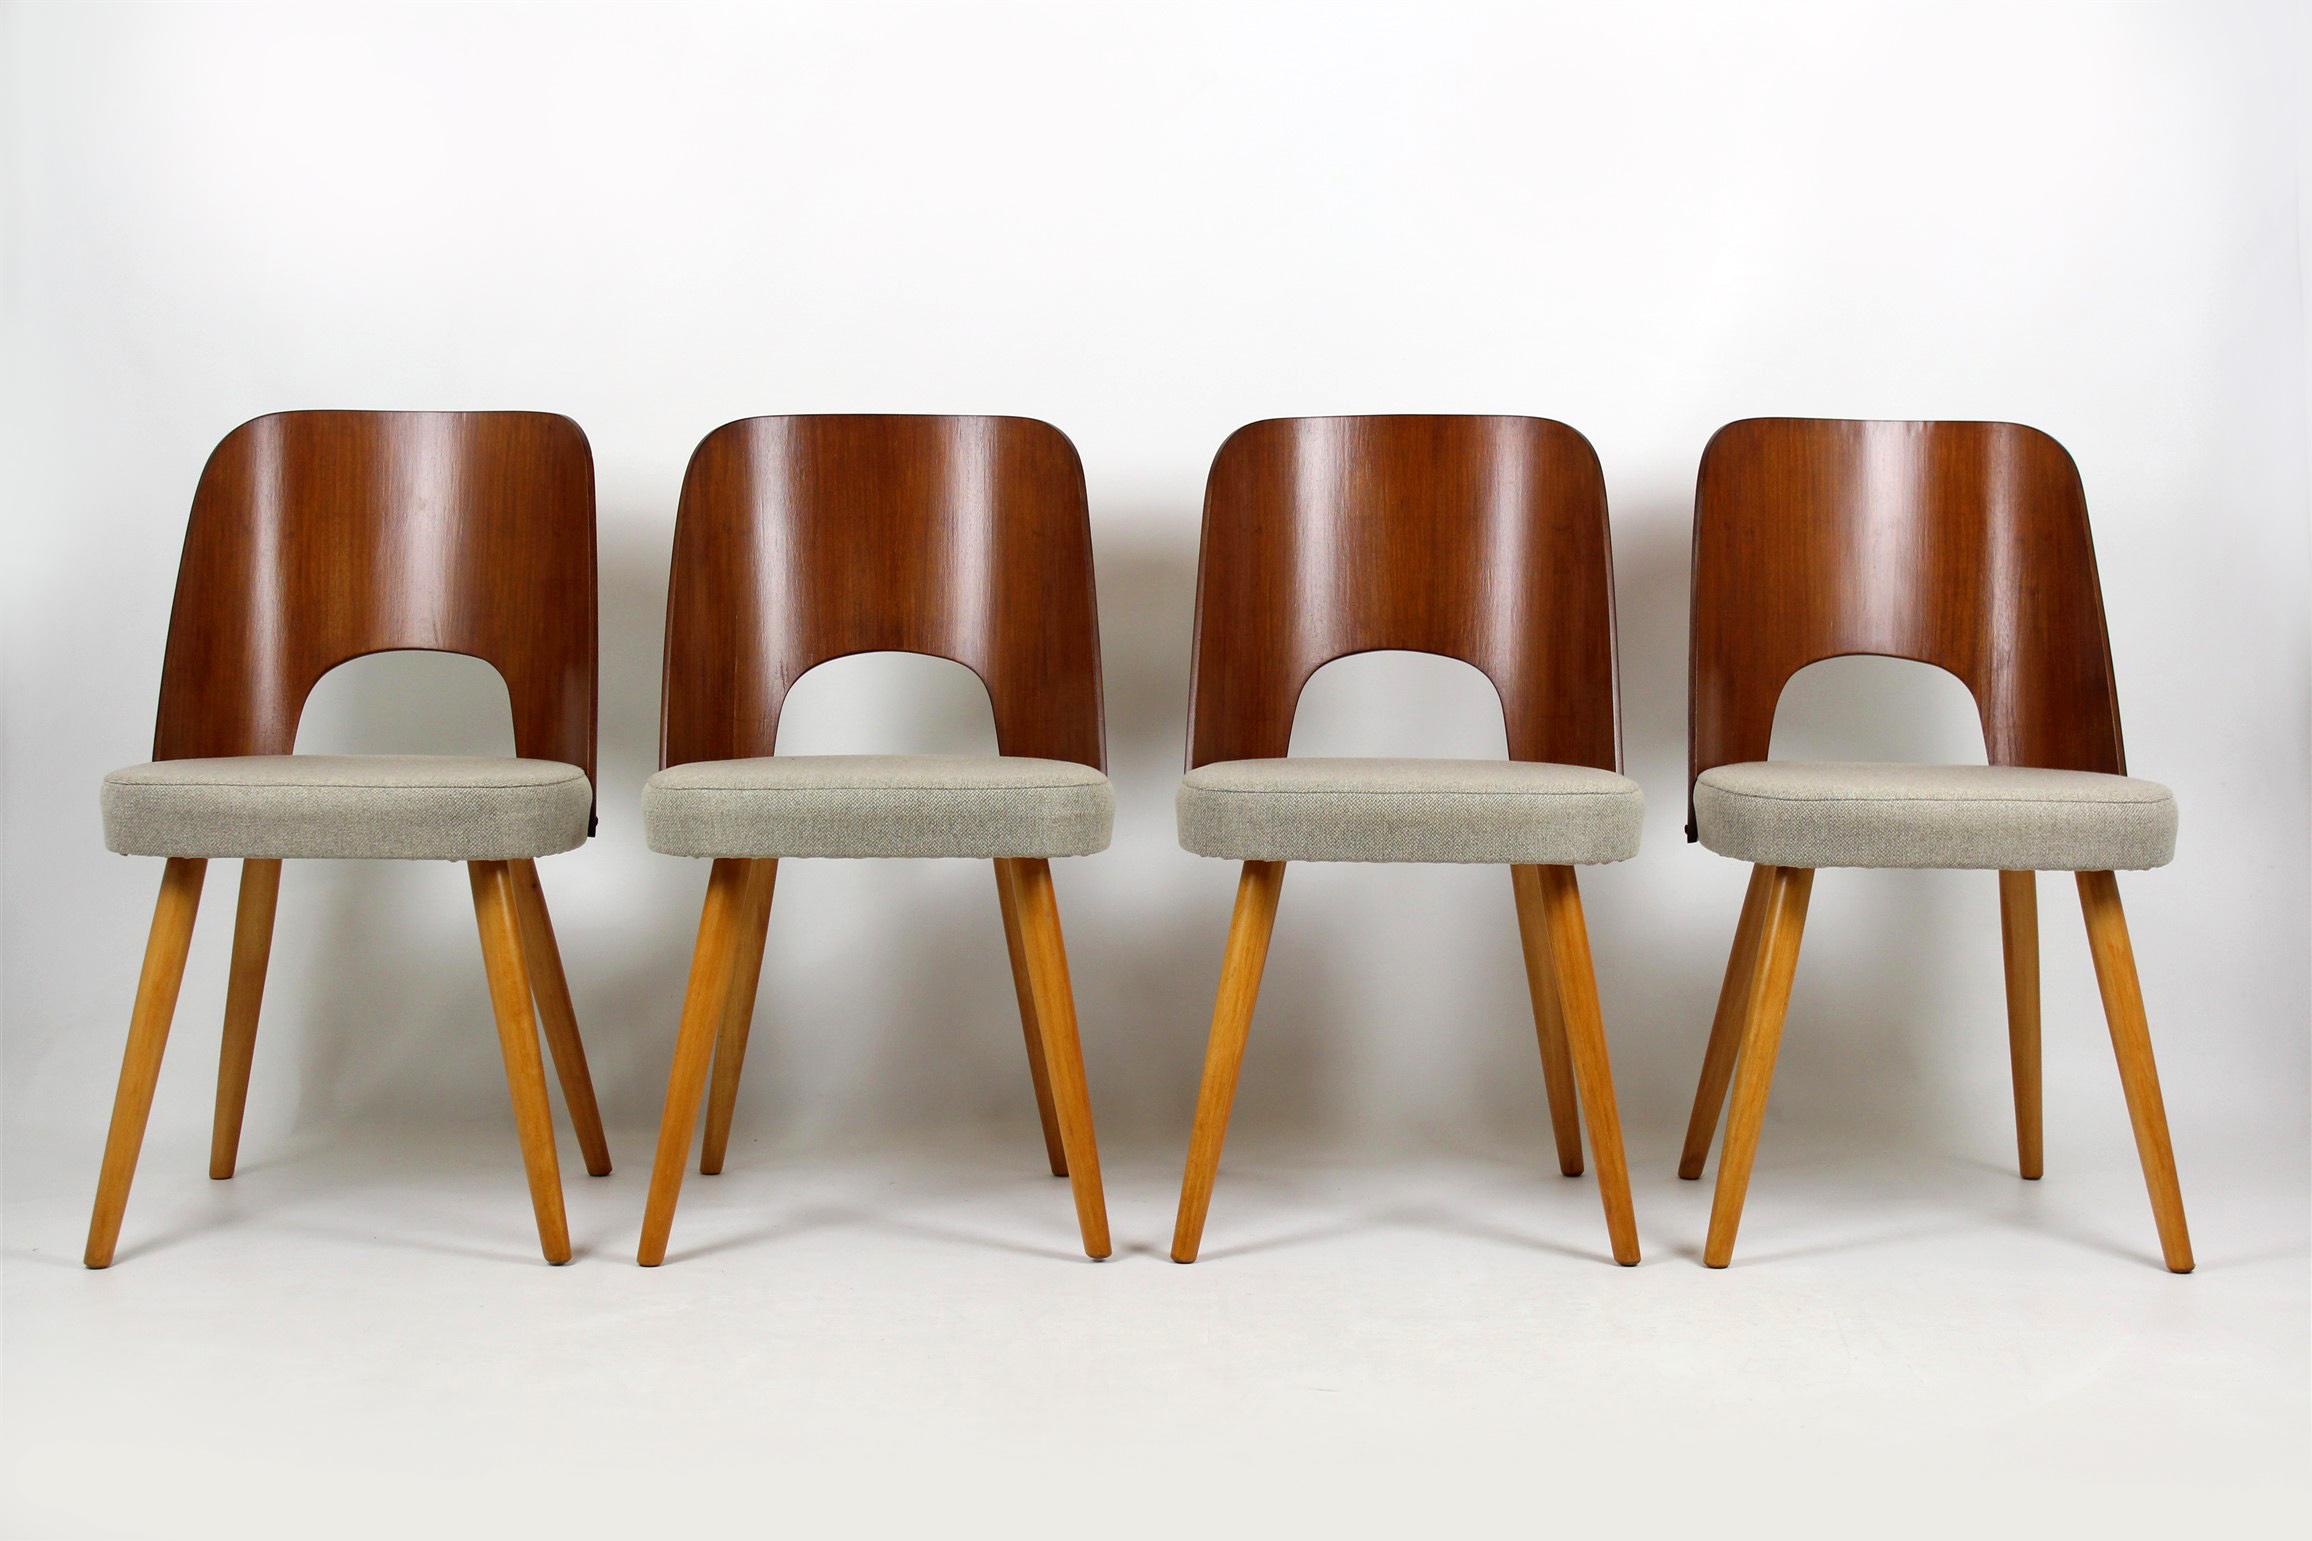 Set of four chairs from Tatra. Designed by Oswald Haerdtl and produced in the 1960s in former Czechoslovakia. Backrests made of veneered bent plywood. Seats reupholstered in beige fabric.